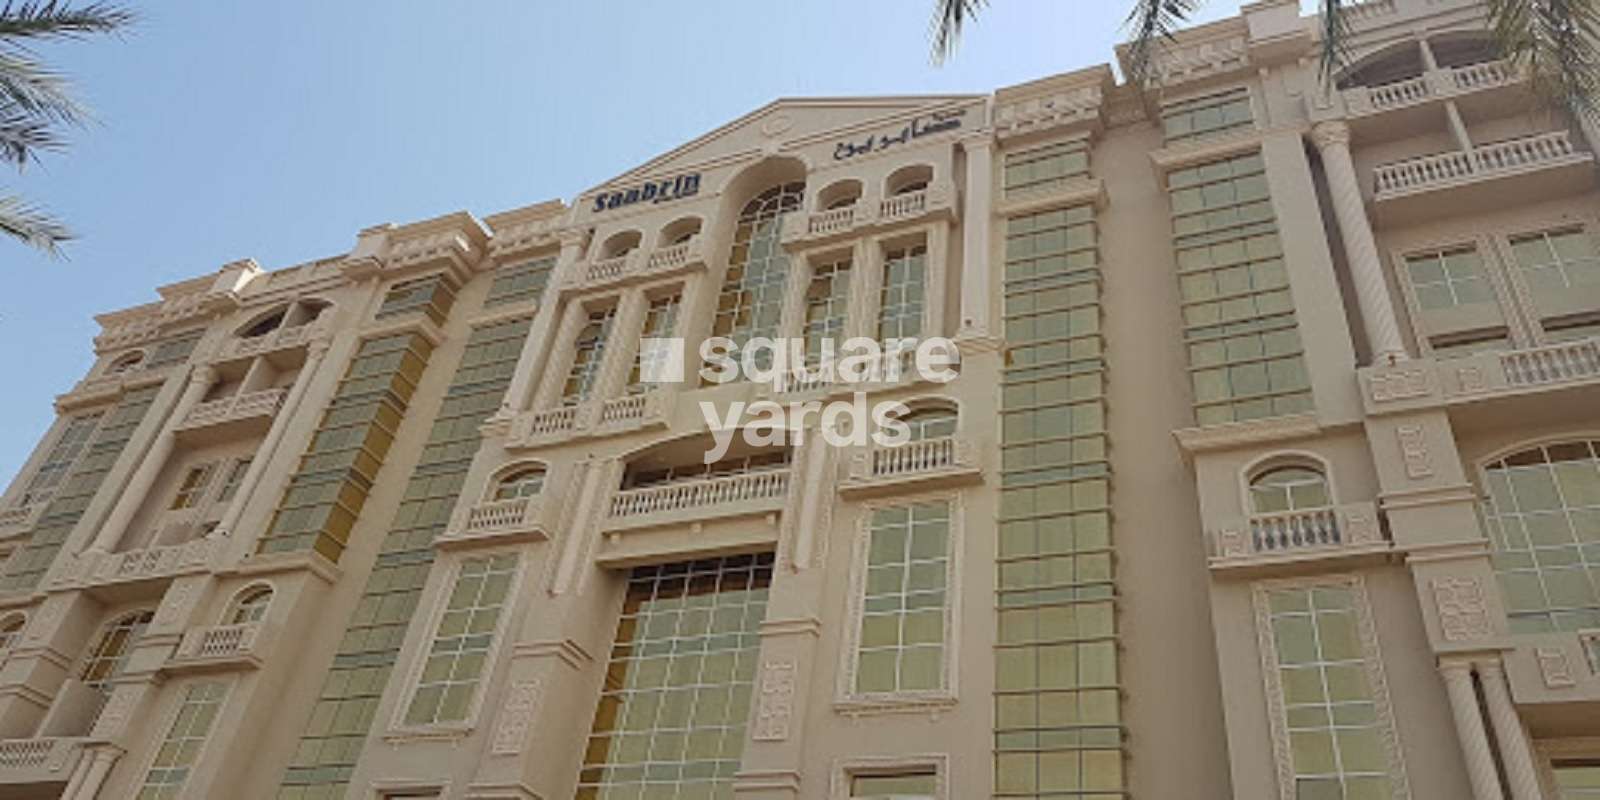 Saabrin Building Cover Image